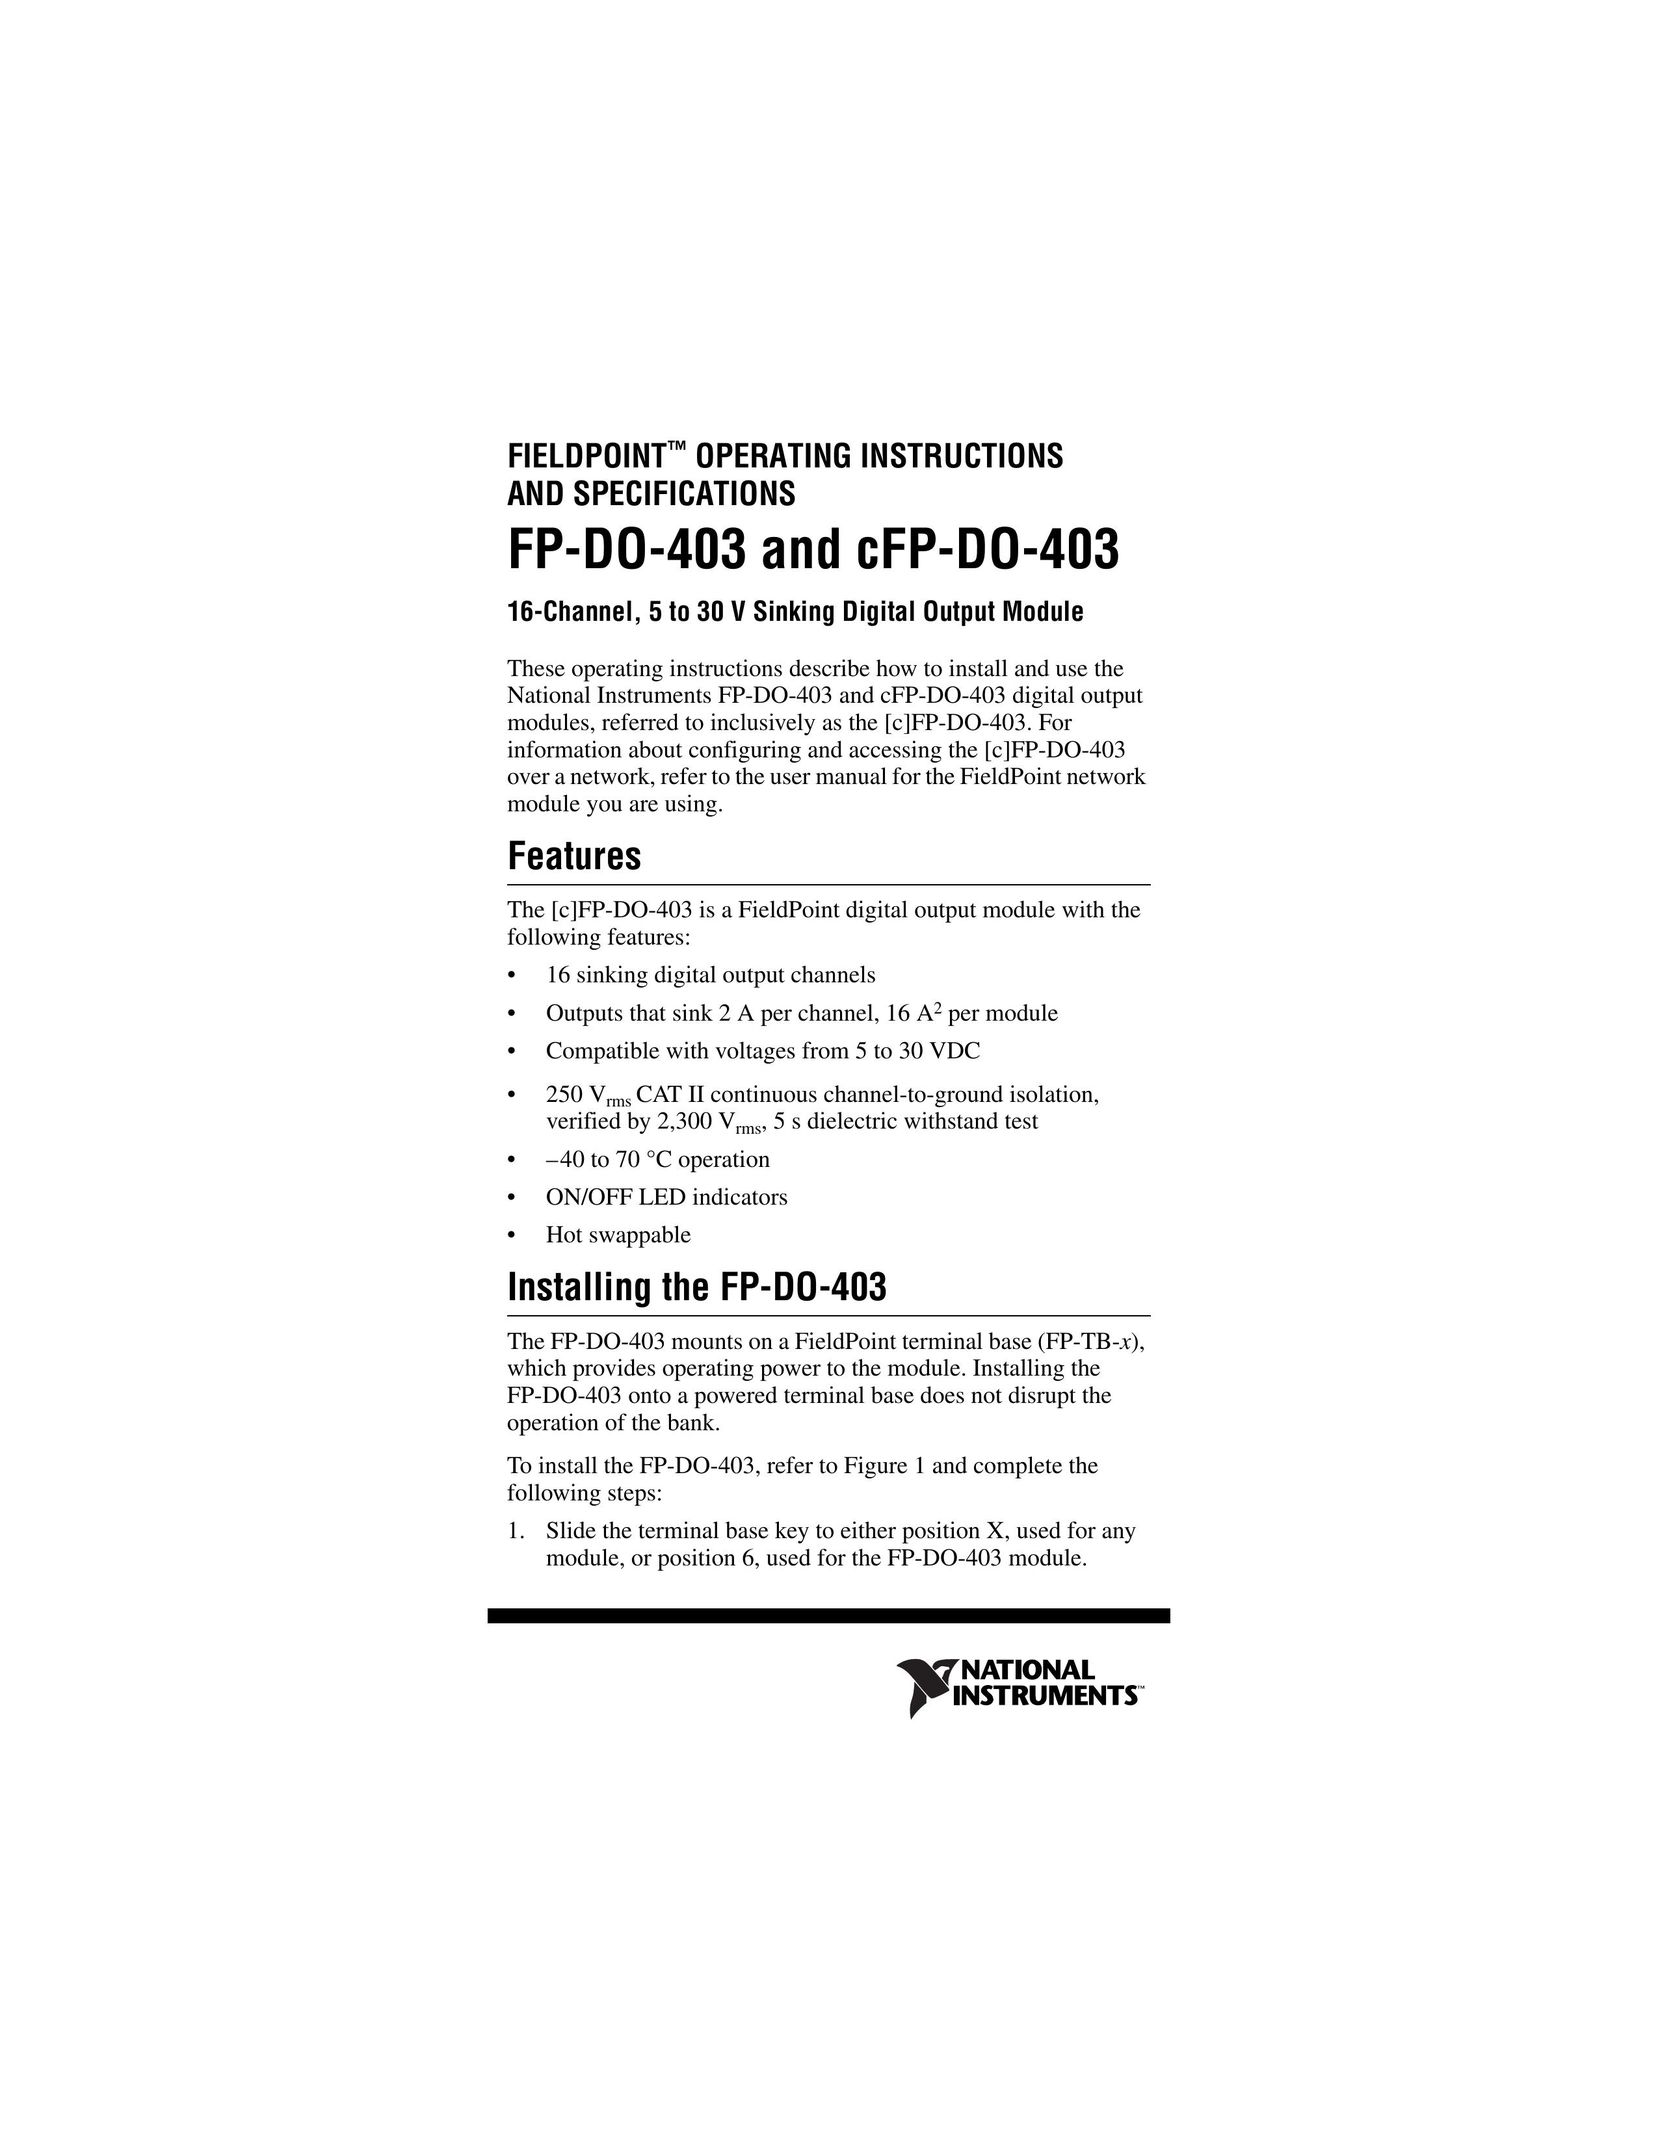 National Instruments cFP-DO-403 Network Router User Manual